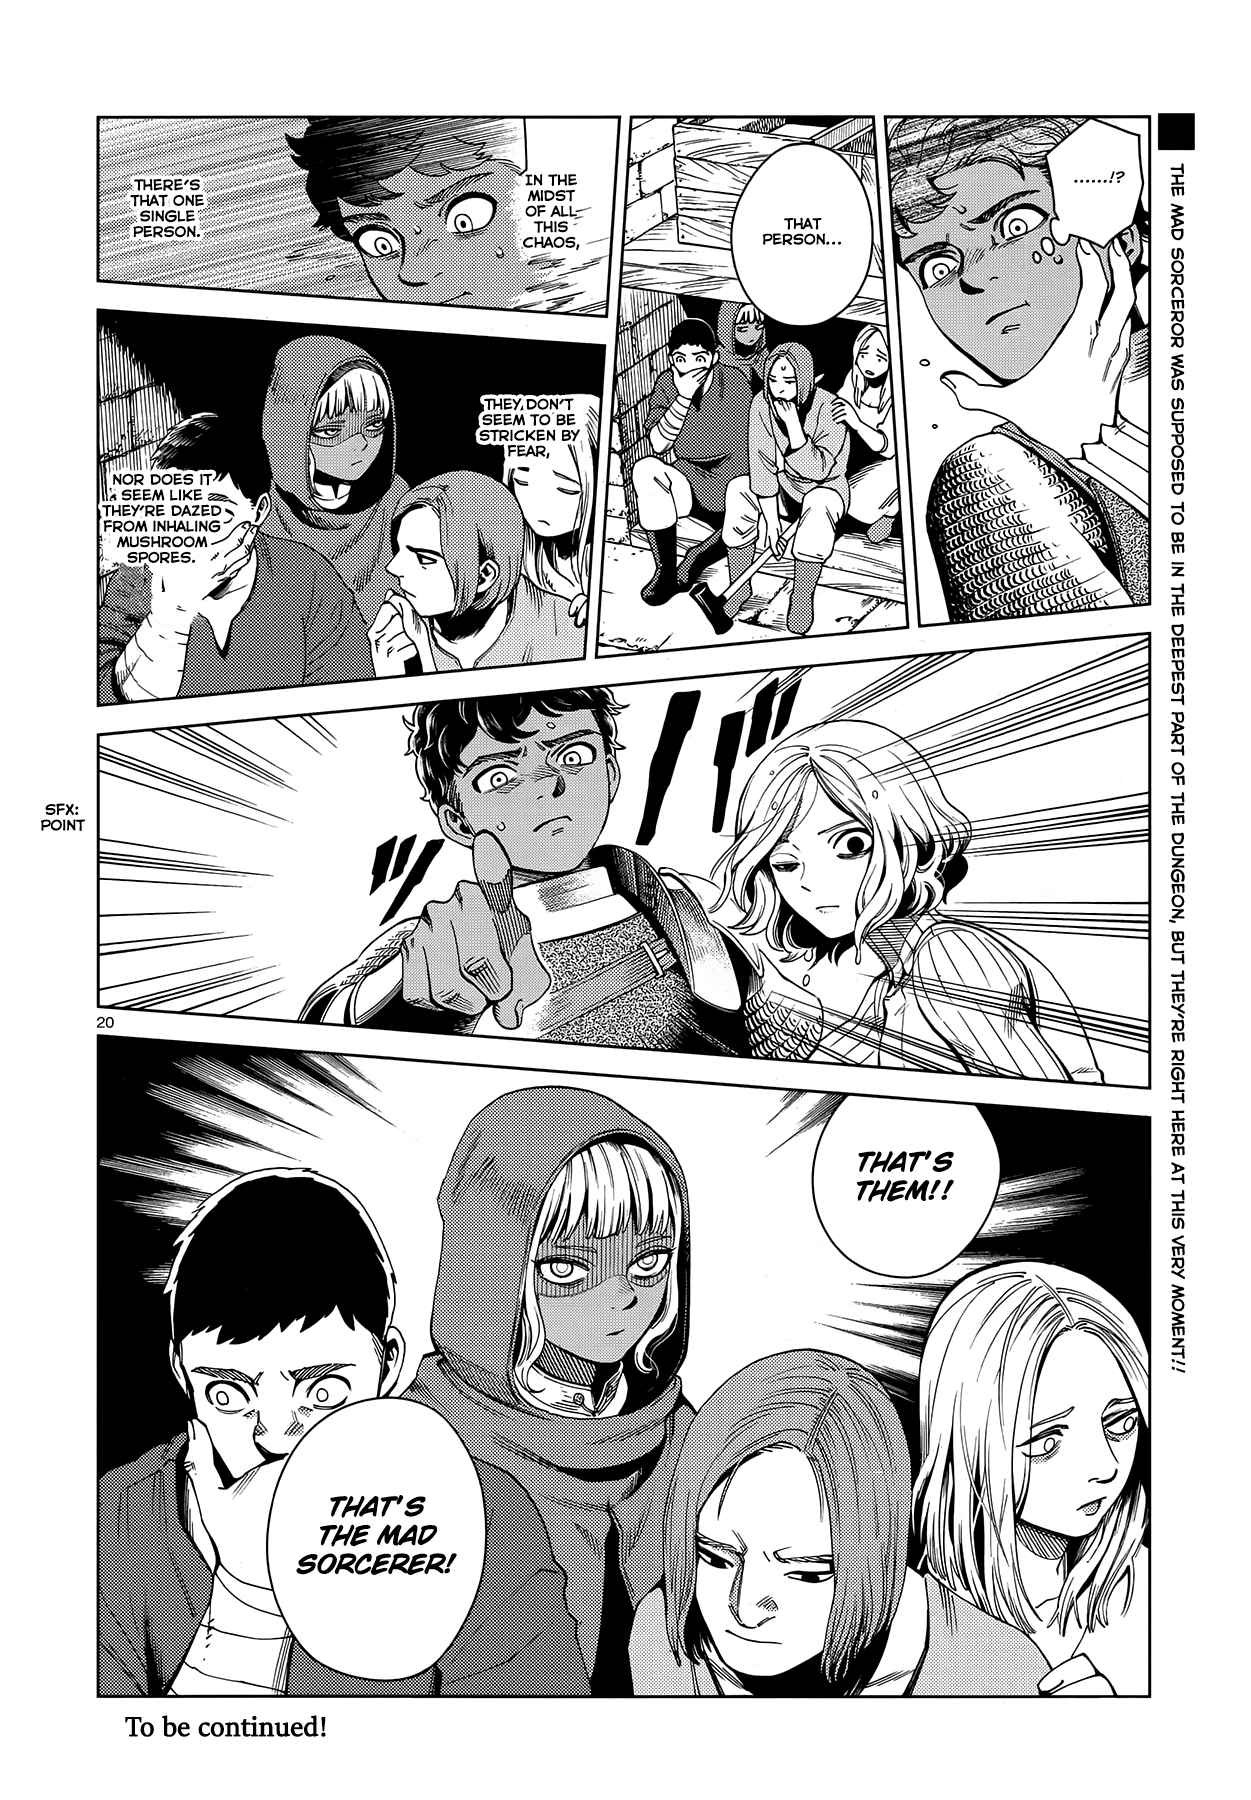 Dungeon Meshi Ch. 54 On the 1st Level, Part II